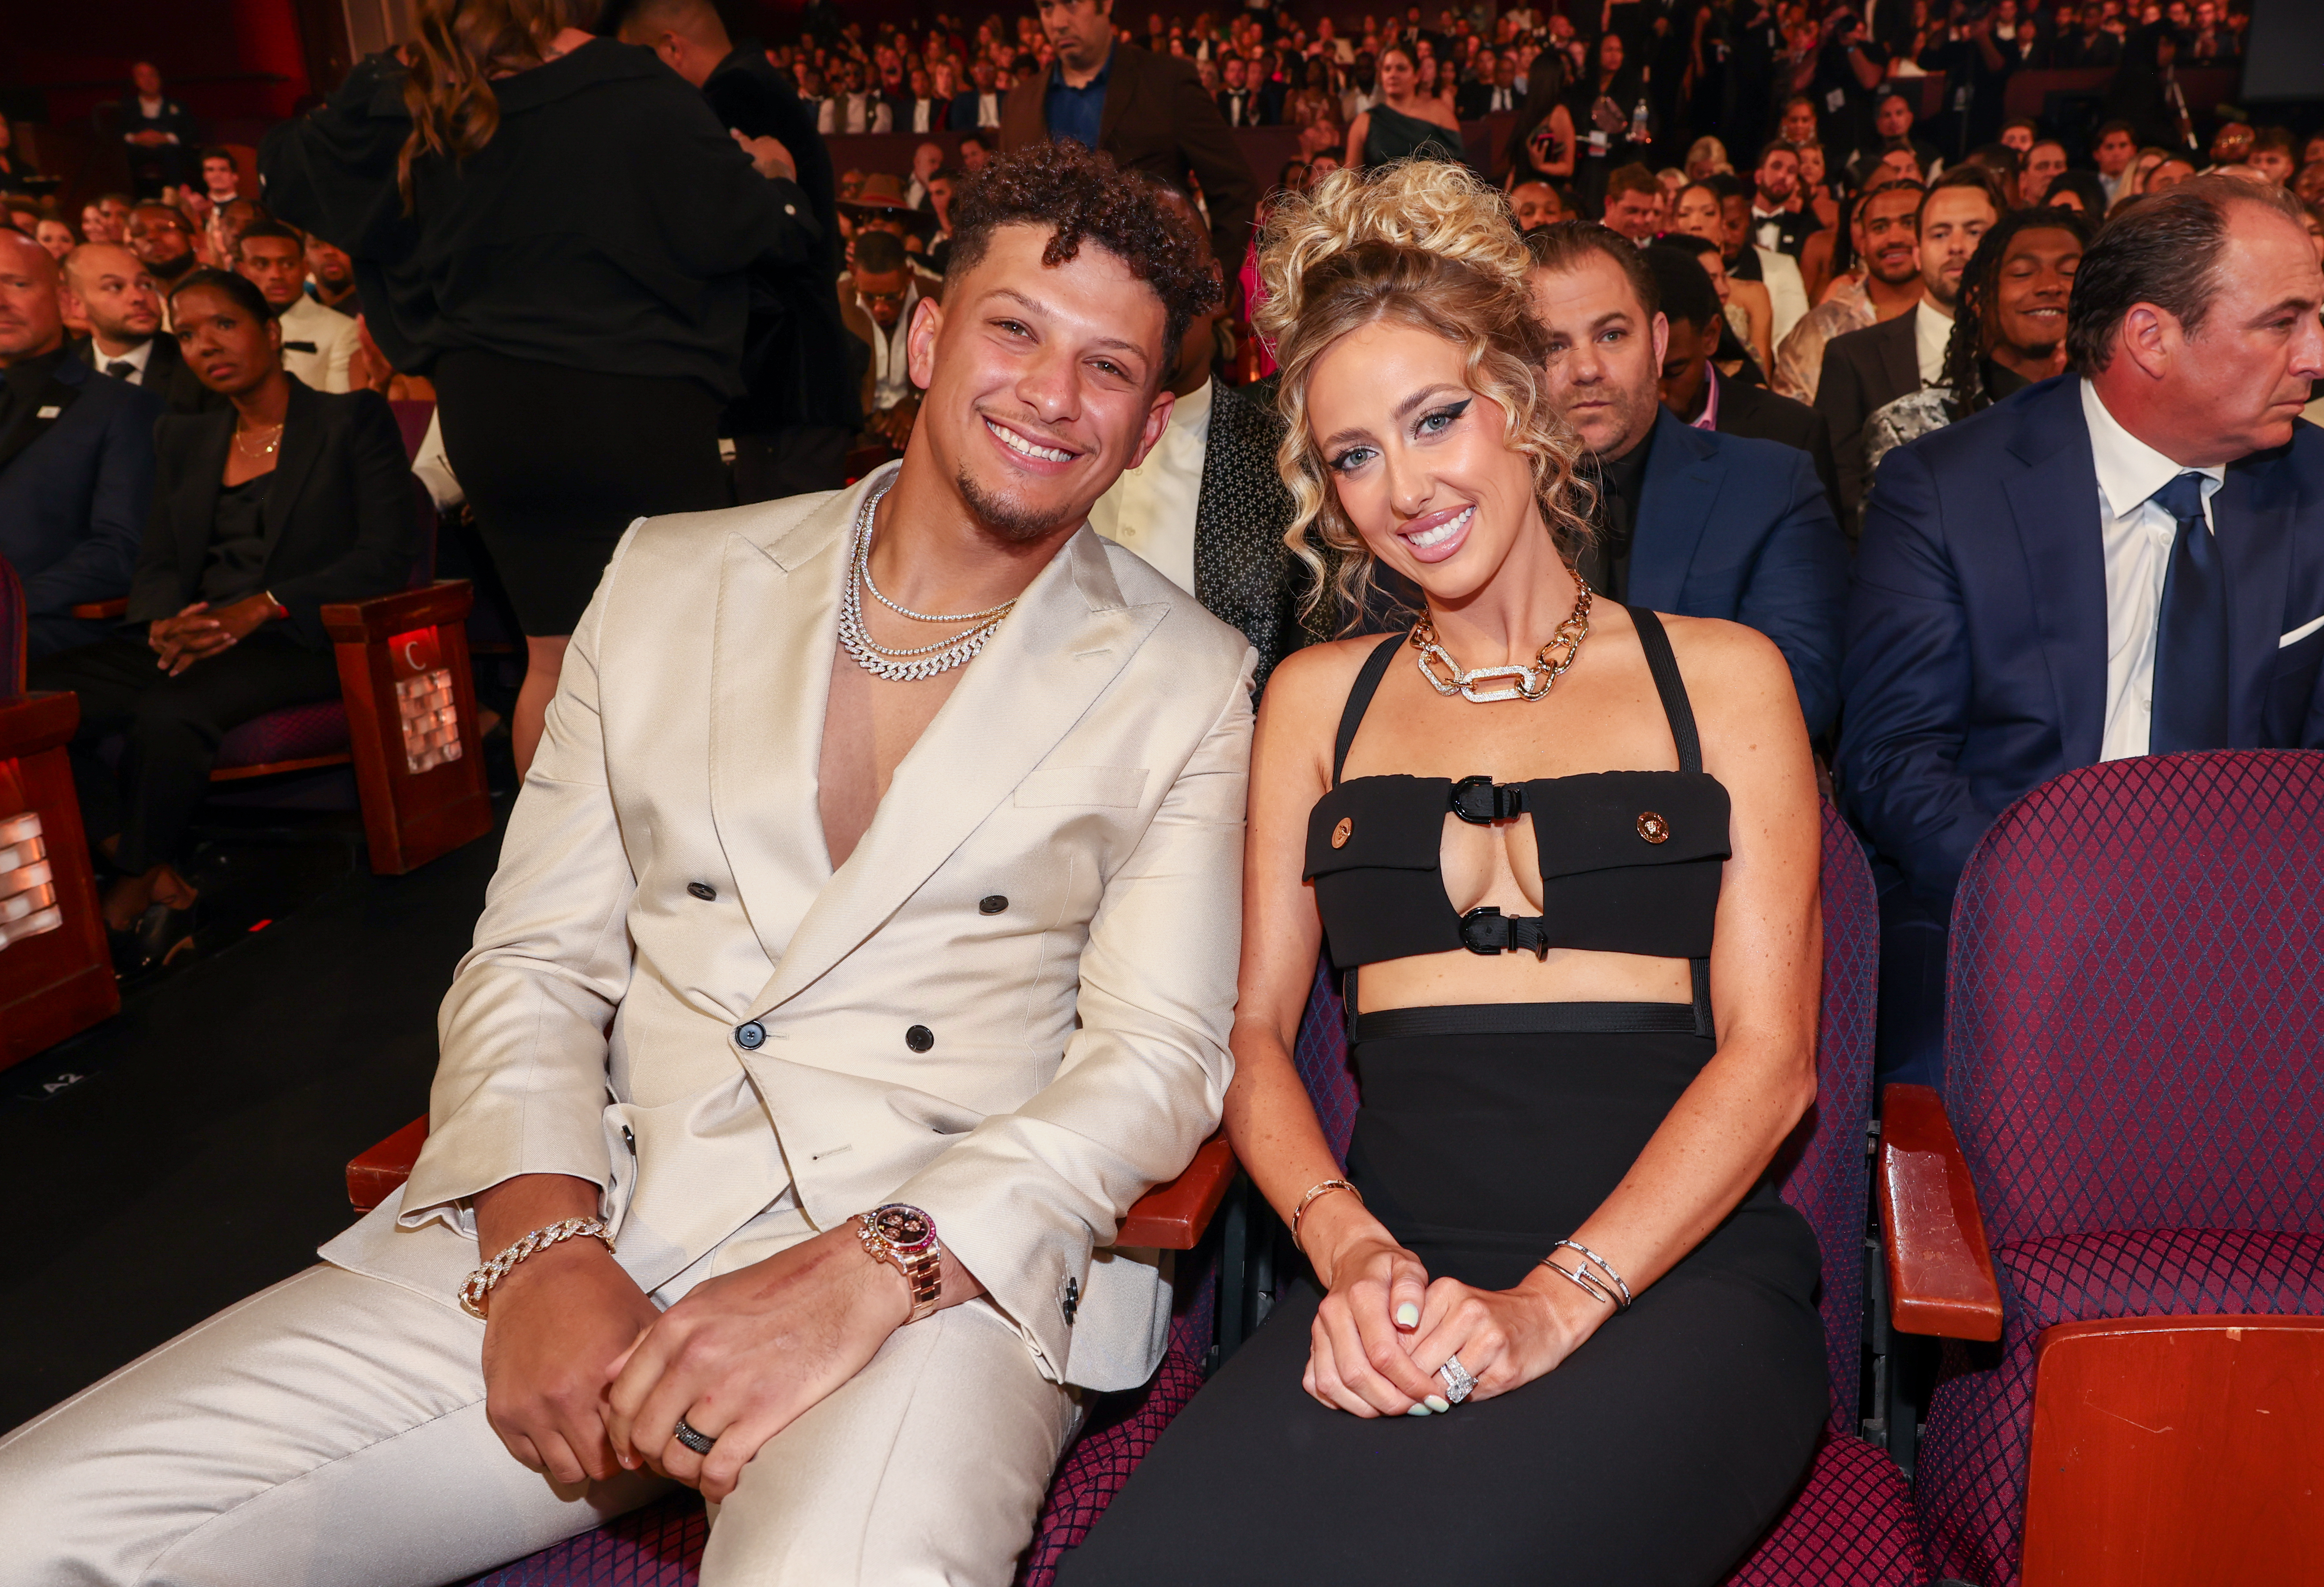 Travis and Taylor will be joined in Florida by his Kansas City Chiefs teammate Patrick Mahomes and his wife Brittany